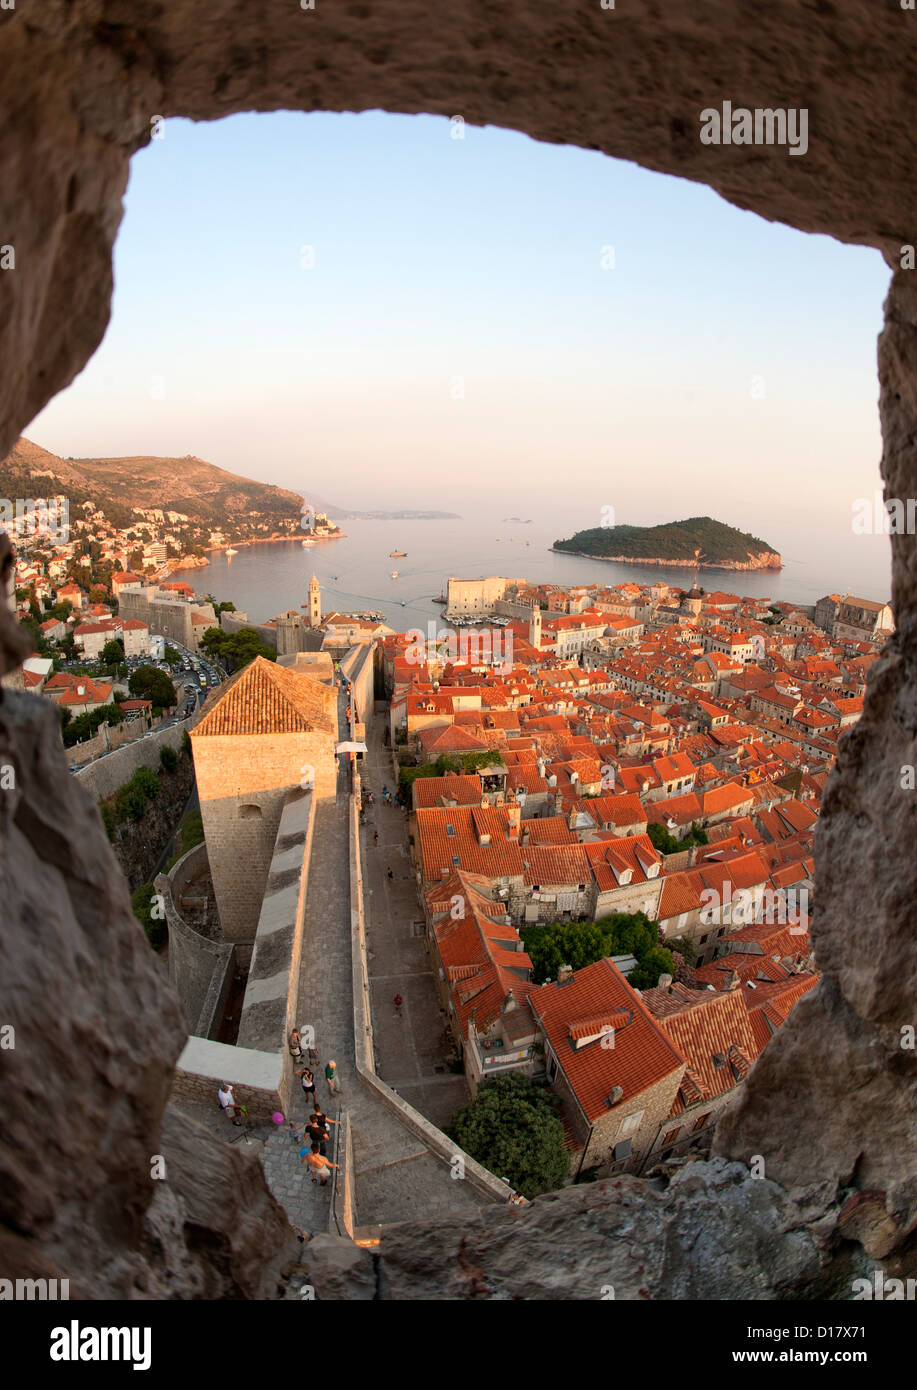 View from Minceta Tower over the rooftops of the old town in the city of Dubrovnik on the Adriatic coast of Croatia. Stock Photo